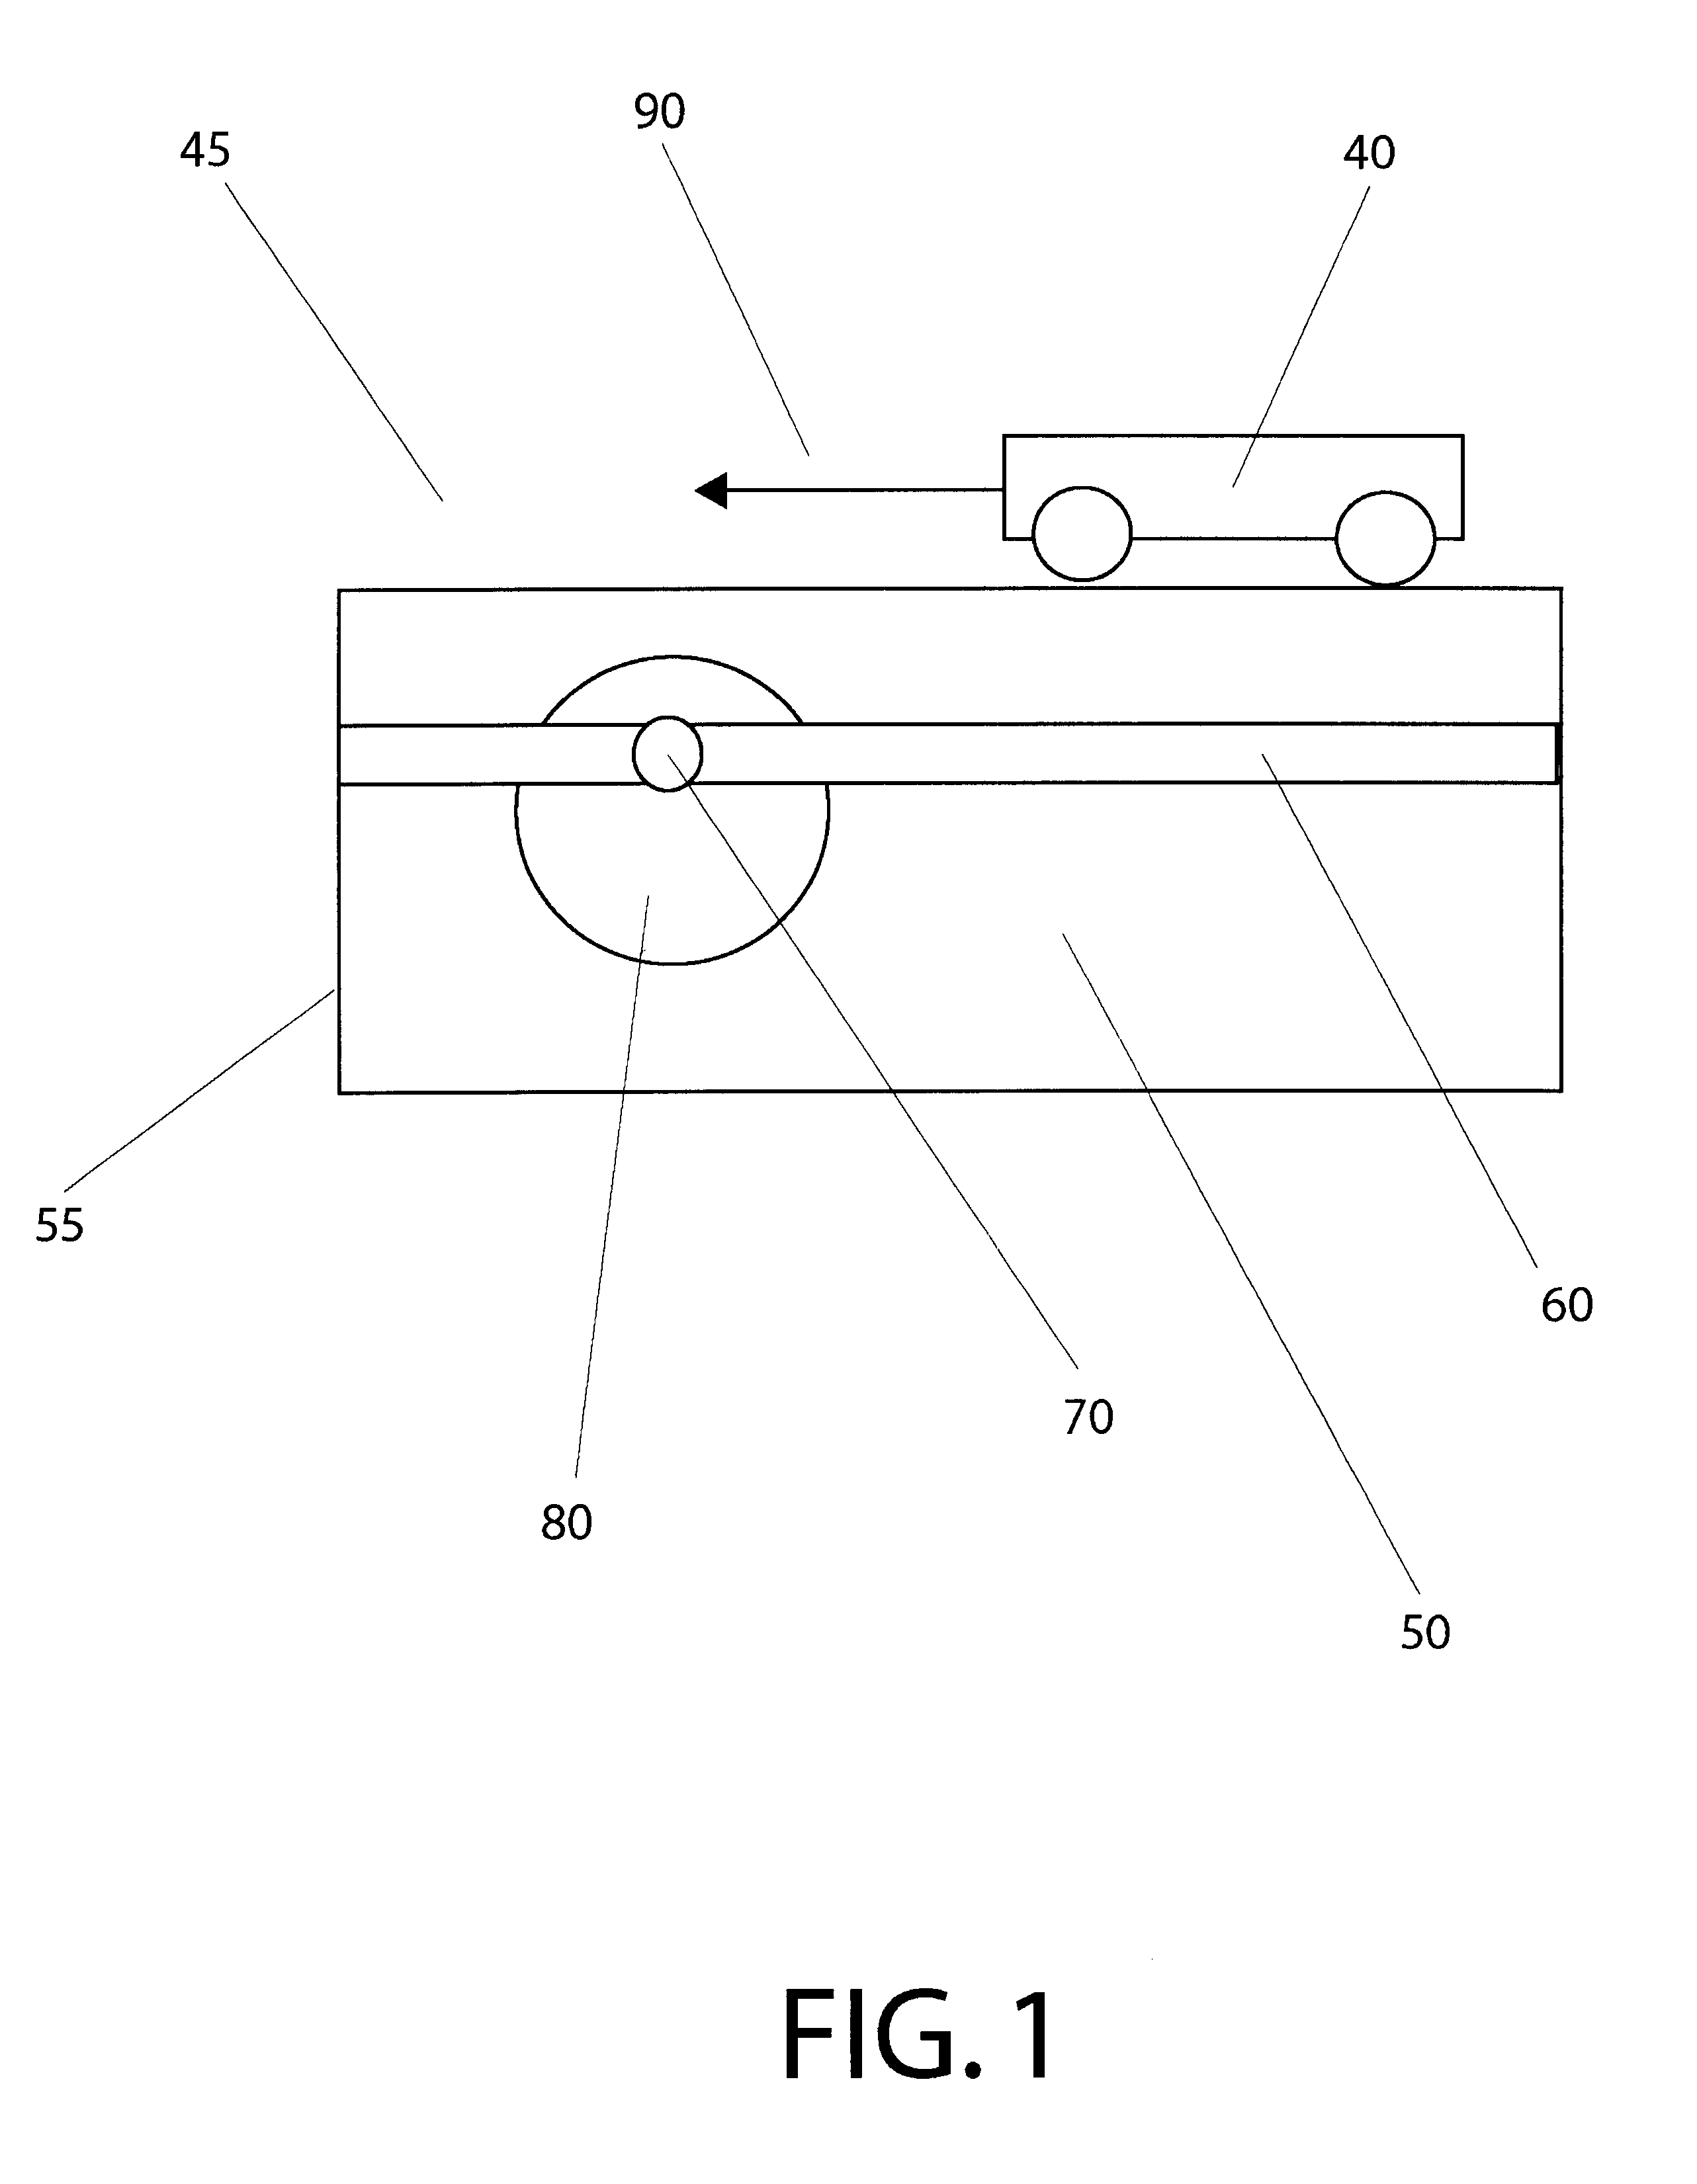 Method and apparatus for detecting leaks in buried pipes by using a selected combination of geophysical instruments